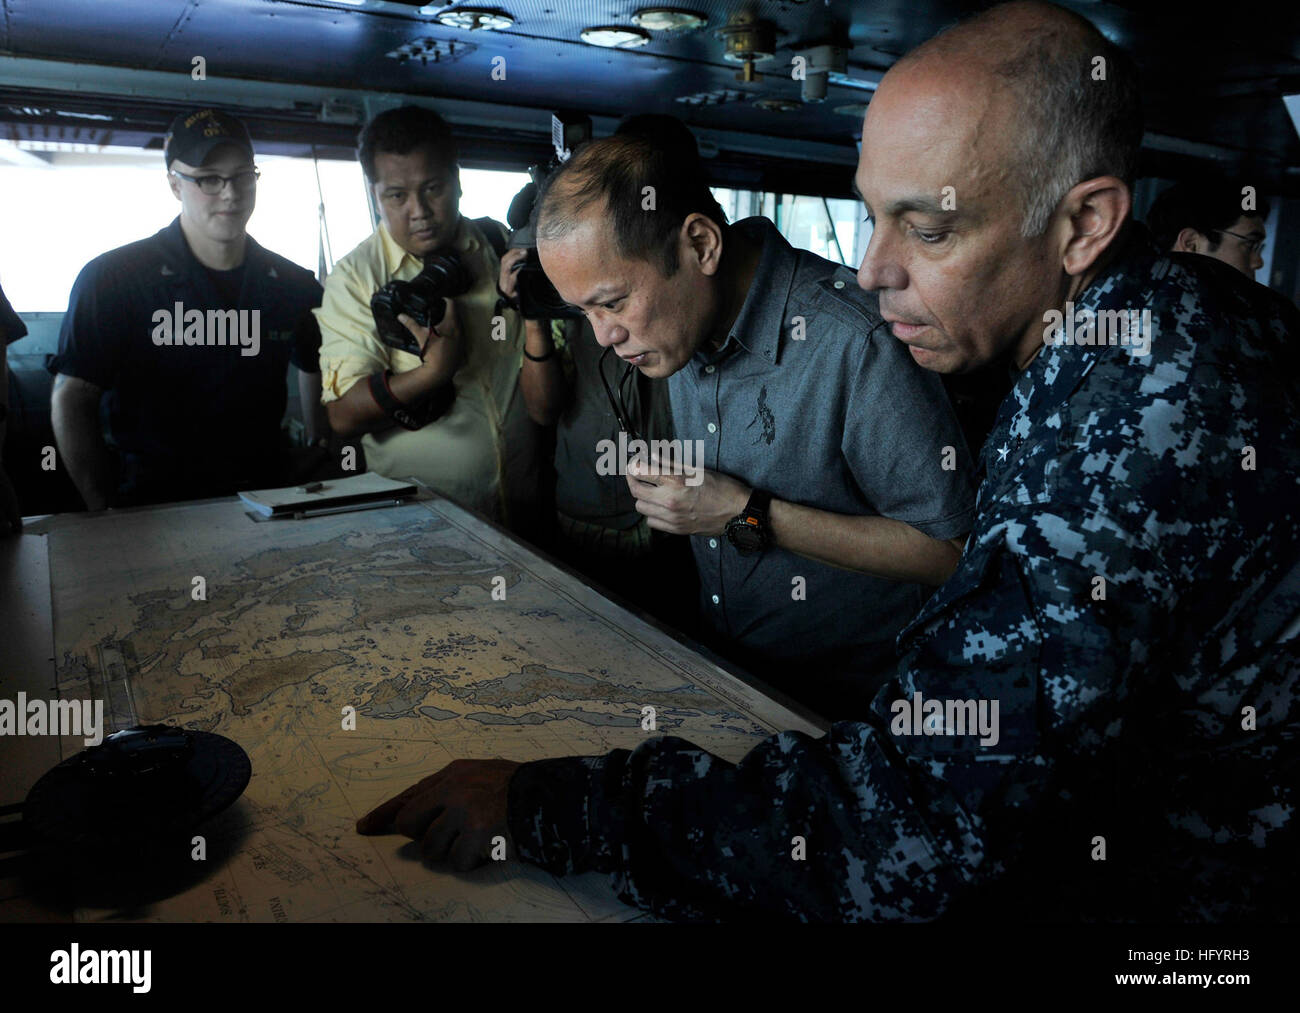 110514-N-DR144-197 PACIFIC OCEAN (May 14, 2011) Republic of the Philippines President Benigno Aquino III studies charts of the Philippines with Rear Adm. Samuel Perez, commander of Carrier Strike Group (CSG) 1 on the navigation bridge aboard the Nimitz-class aircraft carrier USS Carl Vinson (CVN 70). Carl Vinson and Carrier Air Wing (CVW) 17 are underway in the U.S. 7th Fleet area of responsibility. (U.S. Navy photo by Mass Communication Specialist 2nd Class James R. Evans/Released) US Navy 110514-N-DR144-197 Republic of the Philippines President Benigno Aquino III studies charts of the Philip Stock Photo